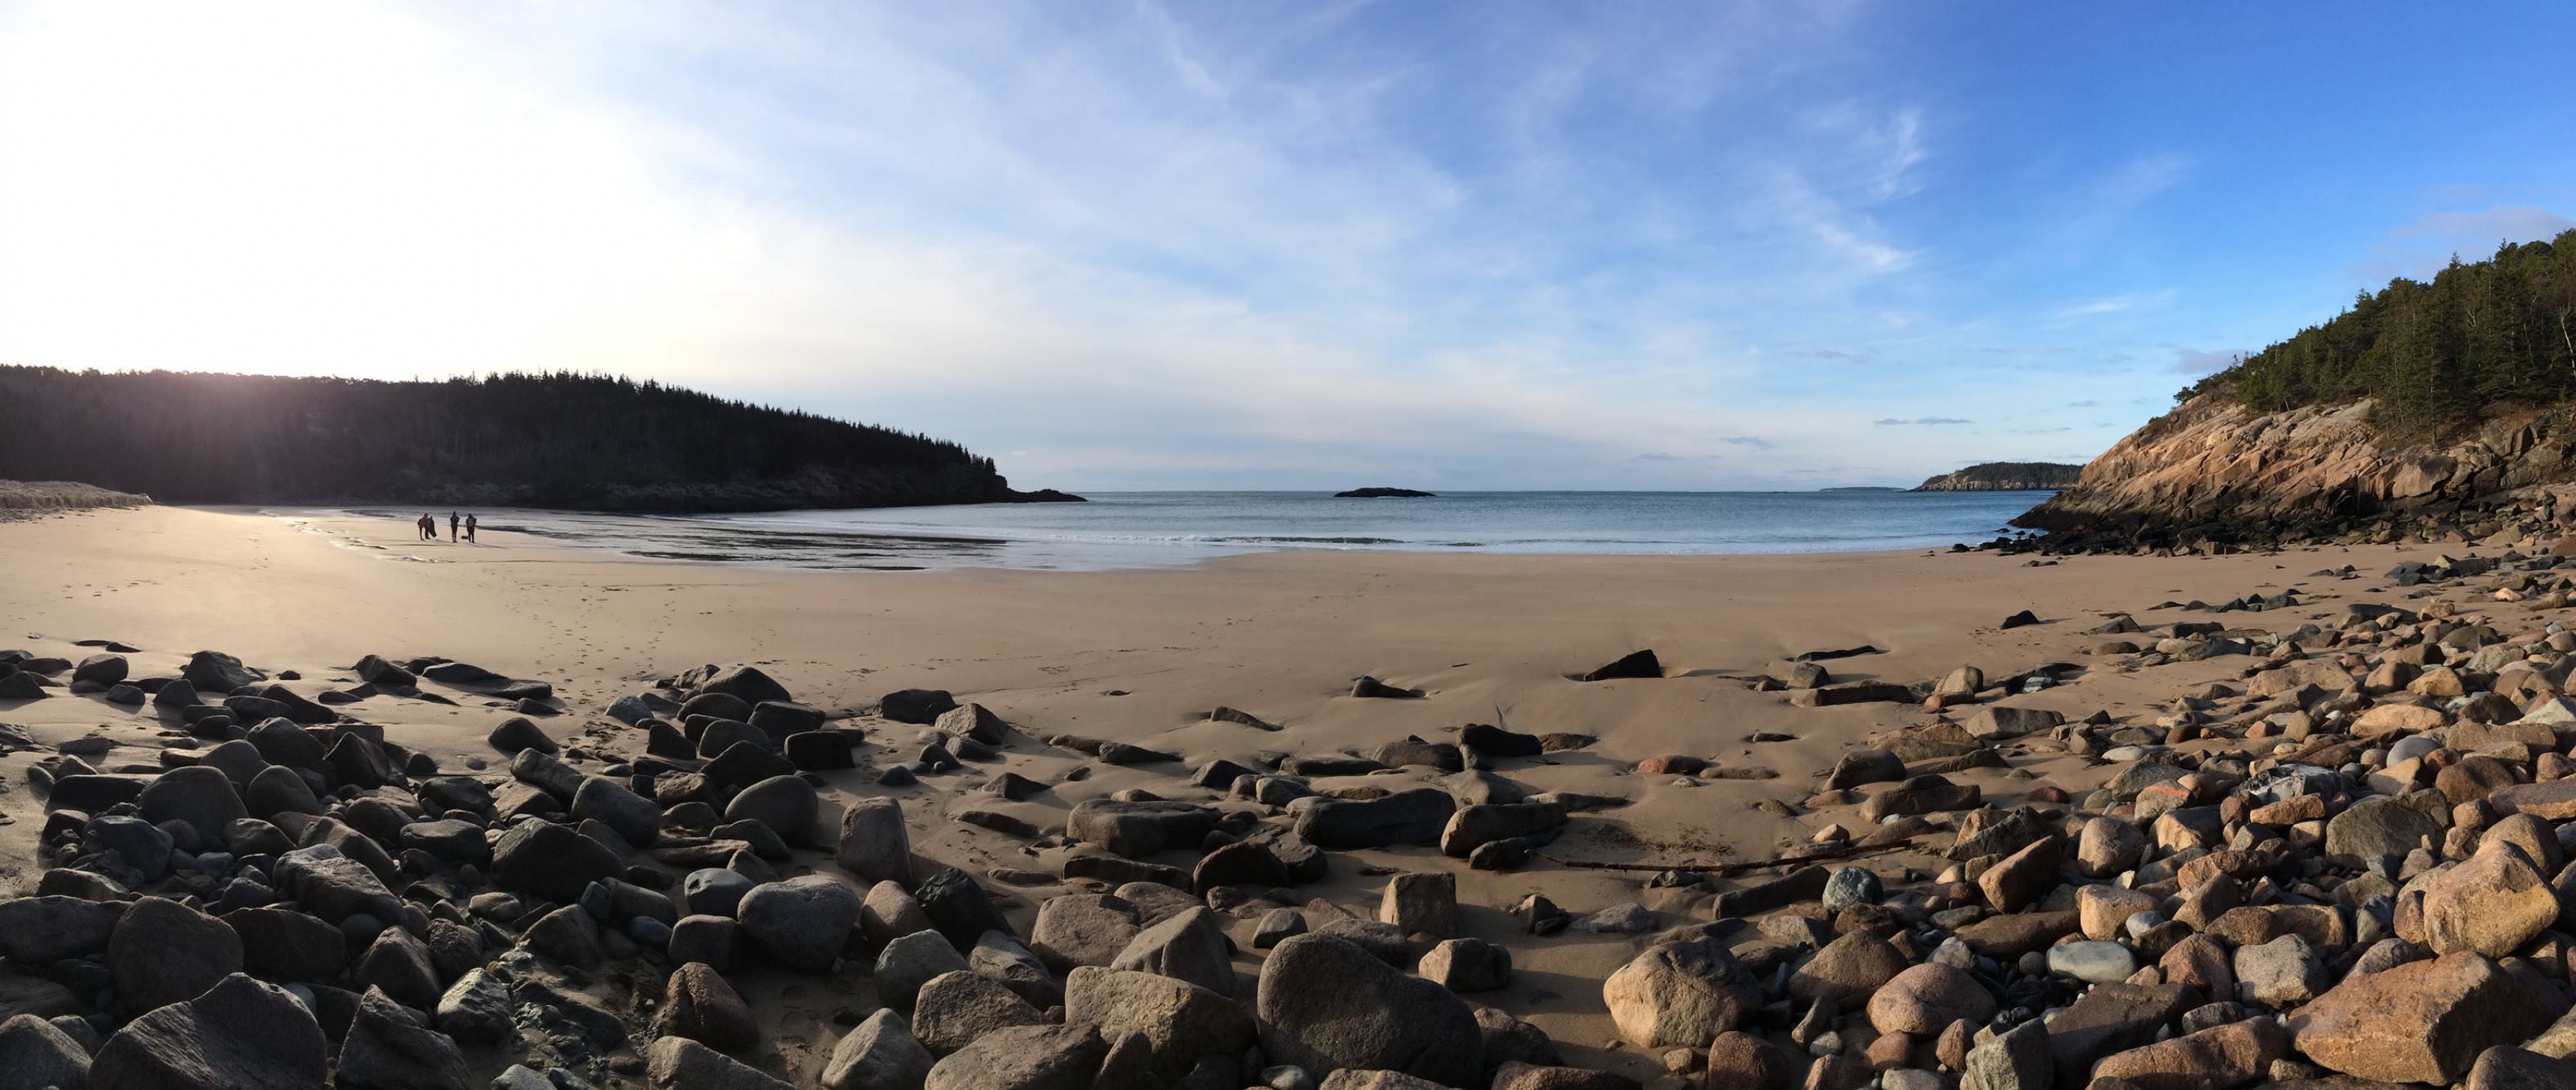 A beach in Acadia National Park in Maine.